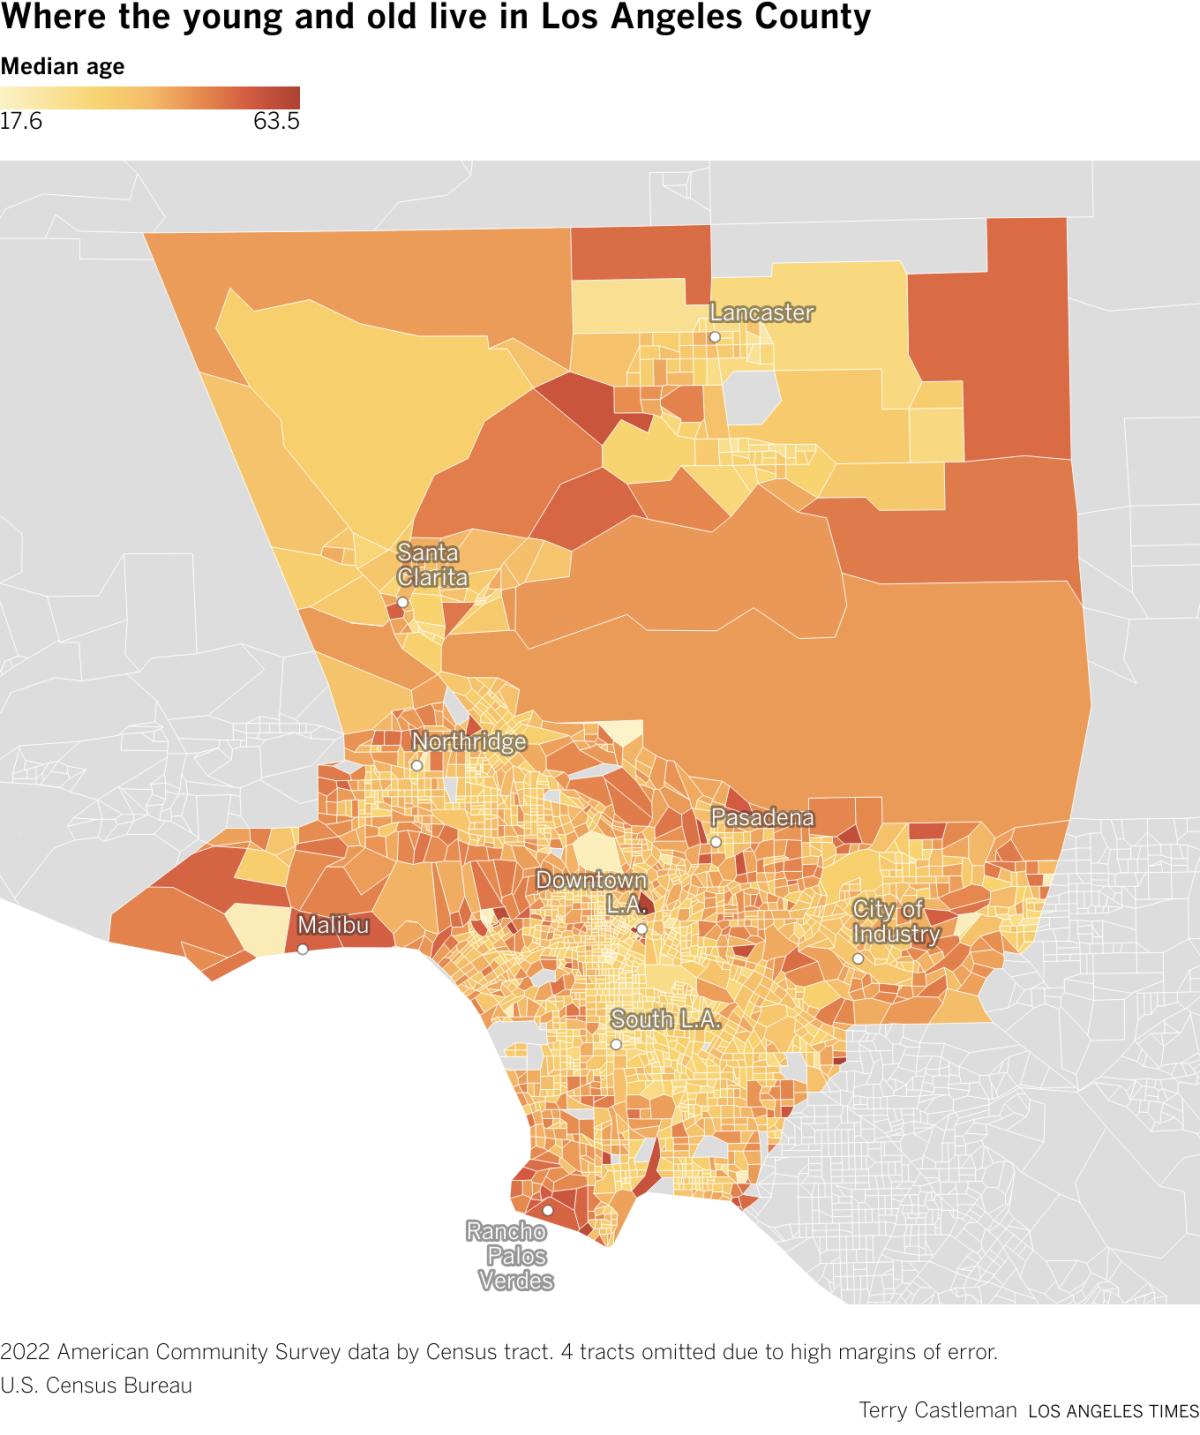 Map showing median age by census tract in Los Angeles county.